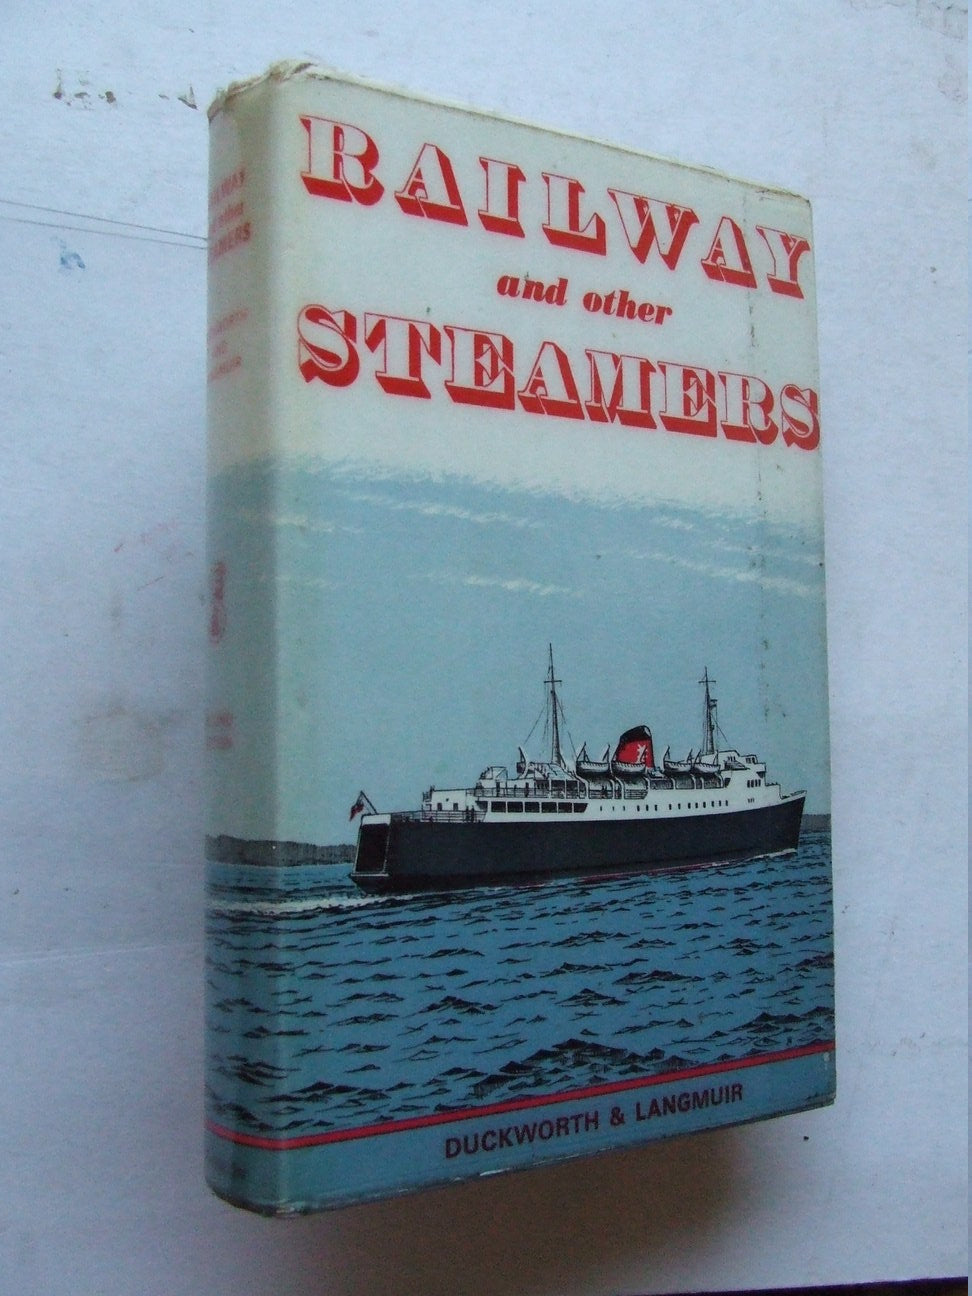 Railway and other Steamers. signed copy